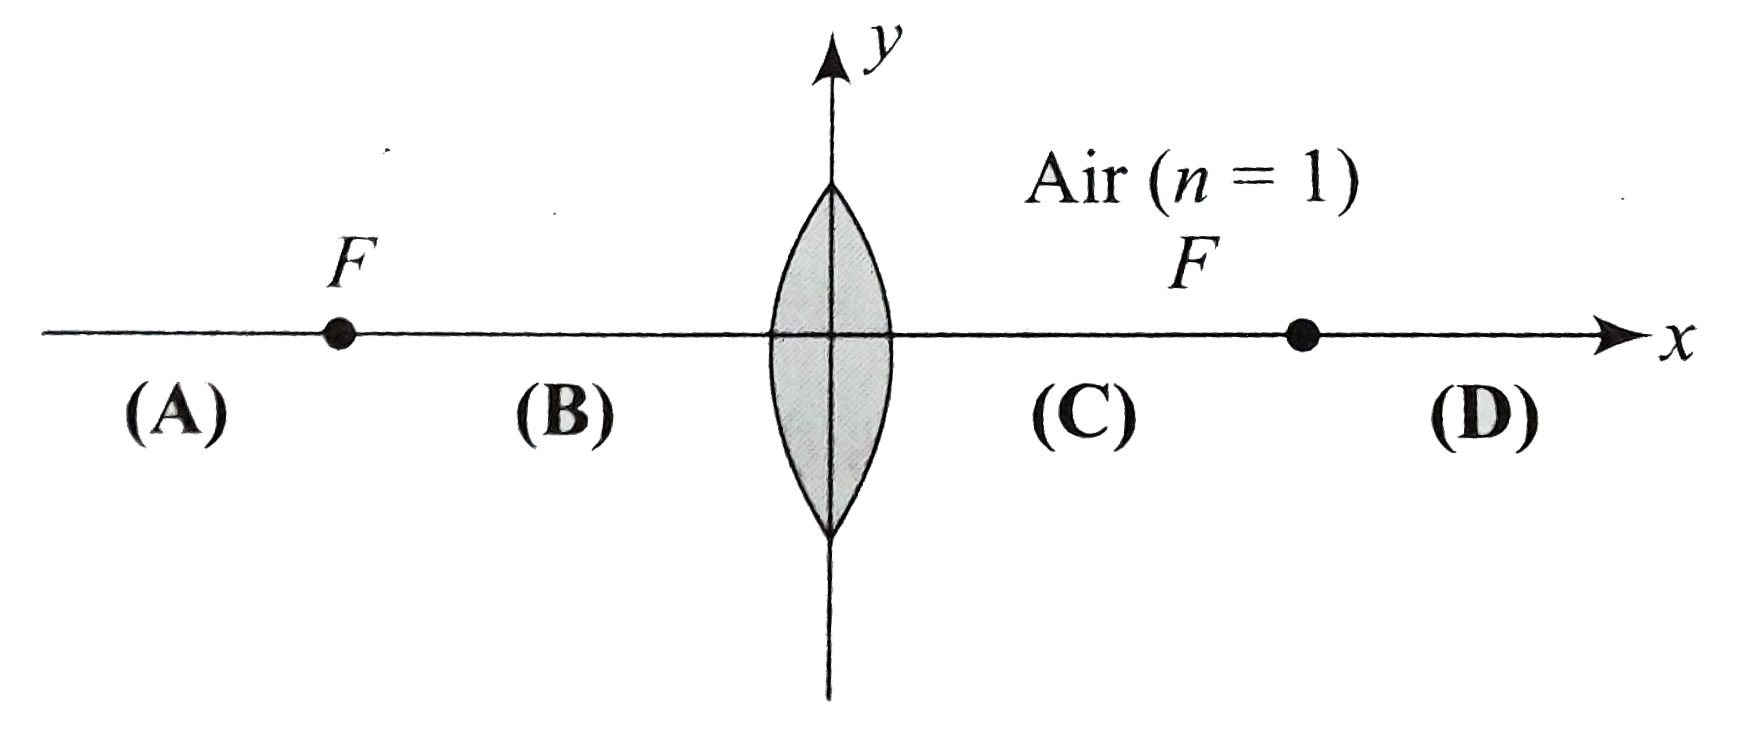 This question concerna a symmetrical lens shown, along with its two focal points. It is made of plastice with n=1.2 and has focal length f. Four different regions are shown:    Here,    A. -oox lt -f    B.  -f lt x lt 0   C. 0 lt x lt f   D. f lt x lt oo       Q. A second lens is now placed adjacent to the first in contact with it. The new lens is concave, with a focal length f=-3f. What is the focal length of the two-lens system? Treat the lenses as thin.